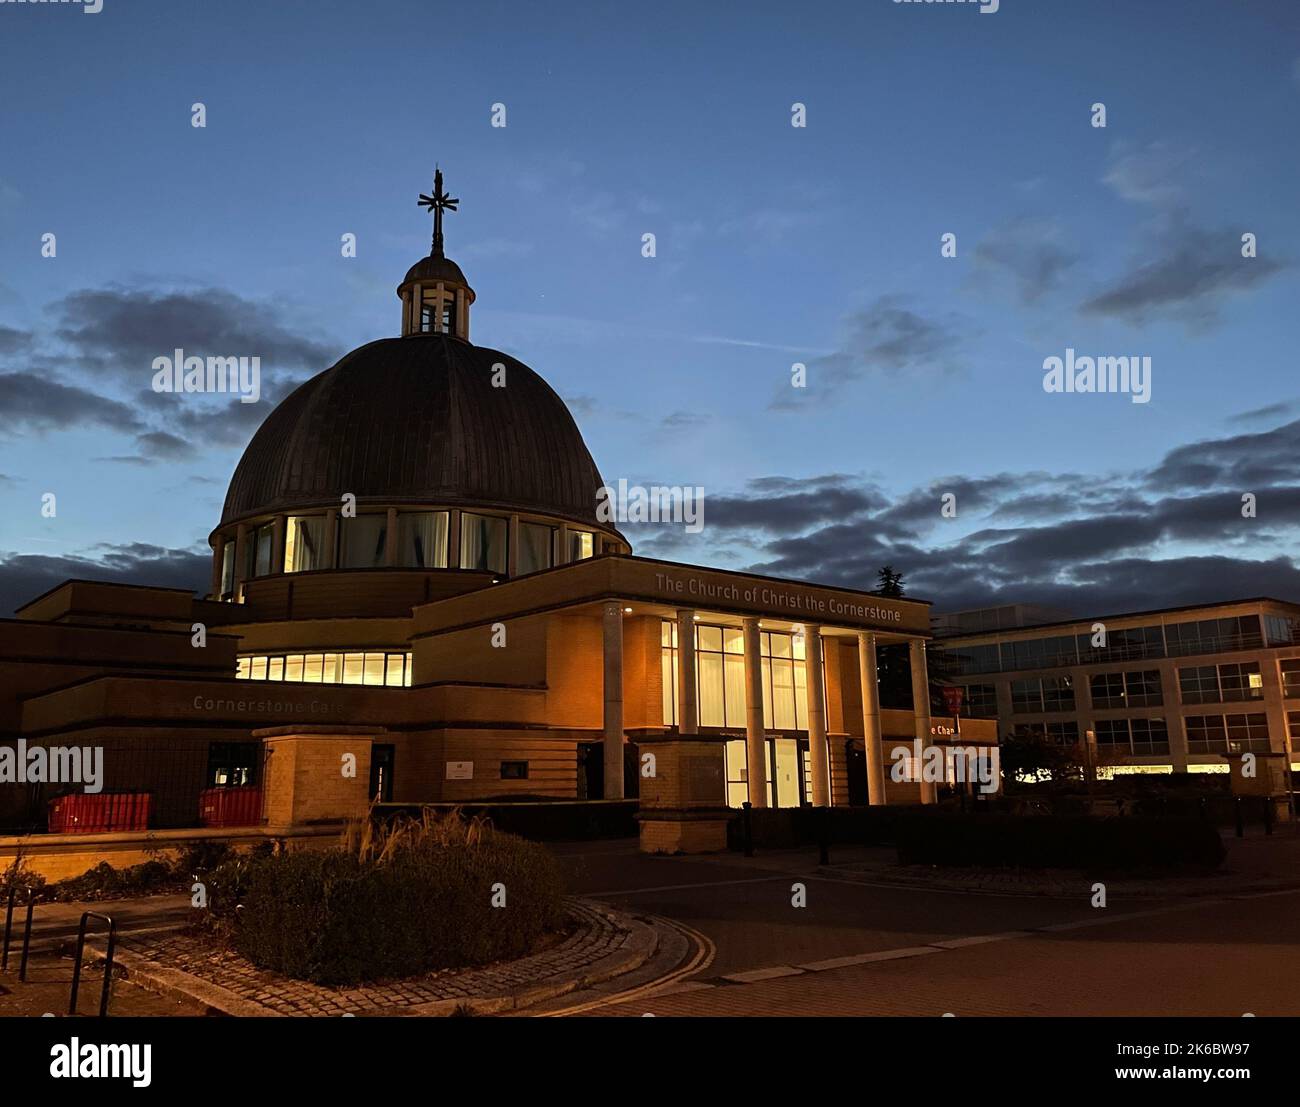 The Church of Christ the Cornerstone in Central Milton Keynes at night. Stock Photo